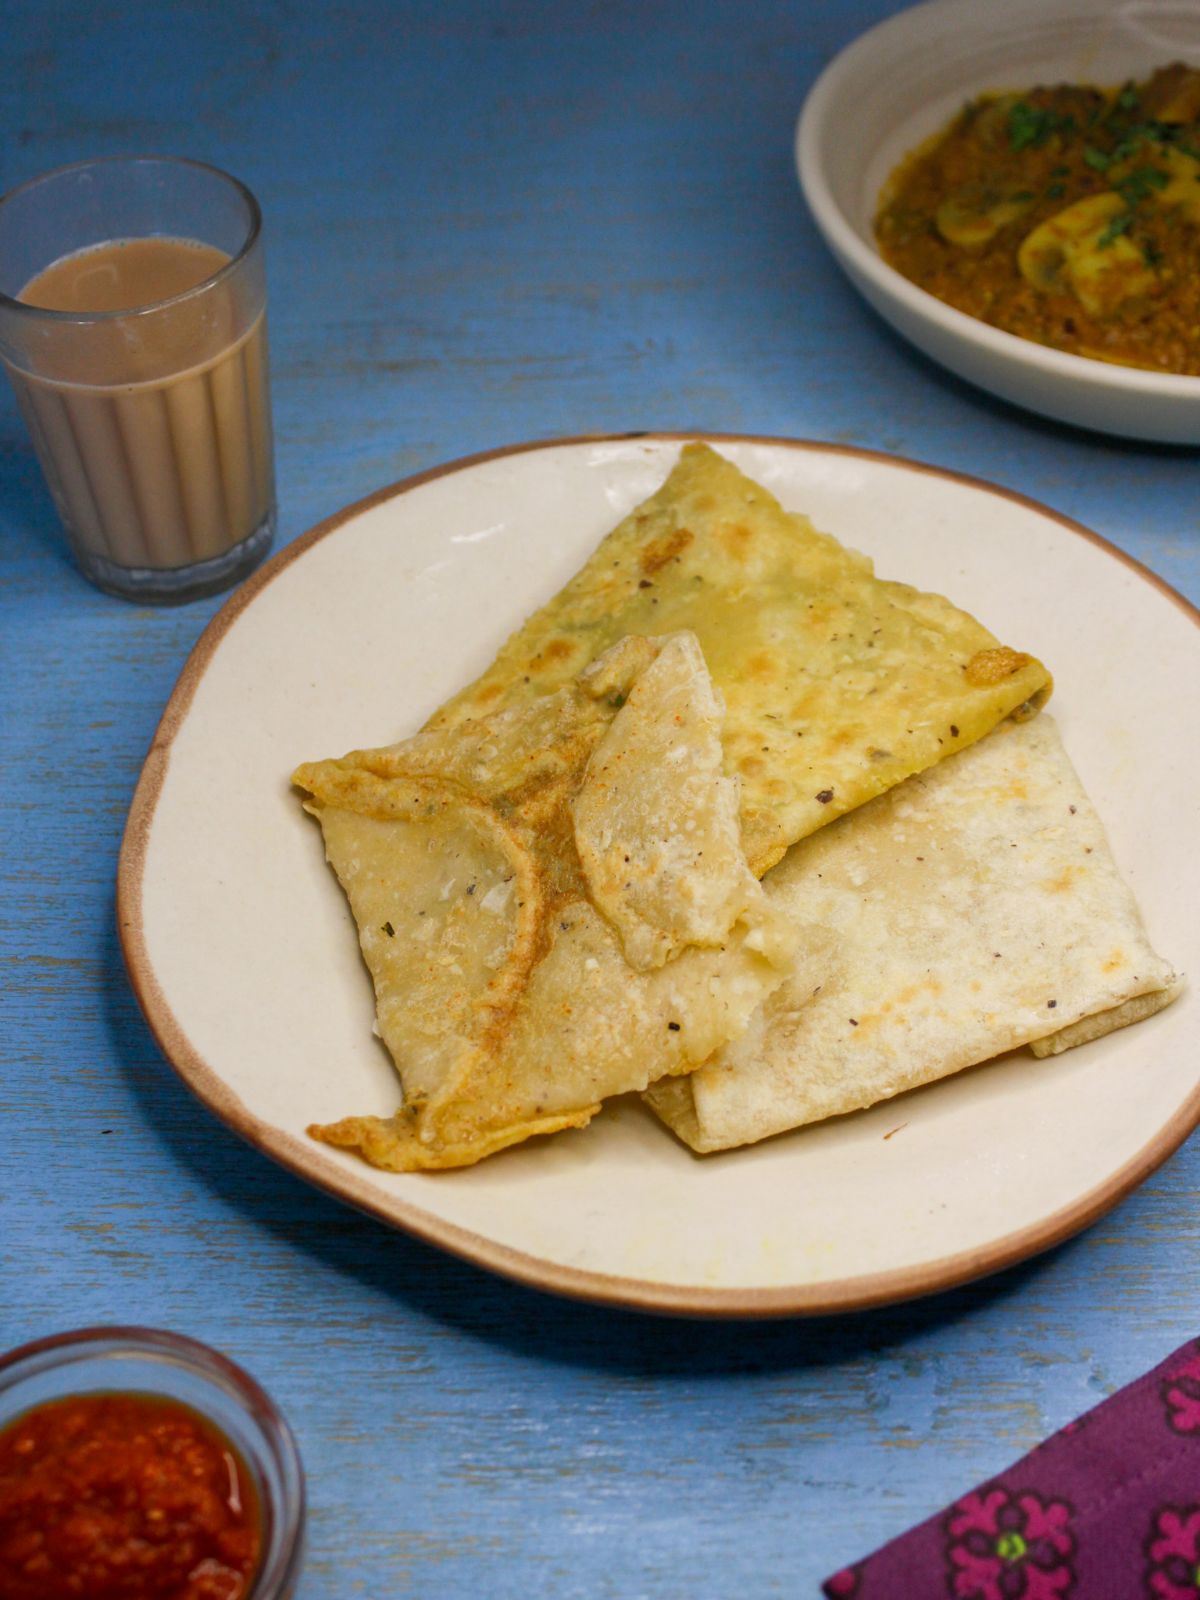 Crispy Sri Lankan Egg Roti served in a plate with chili paste